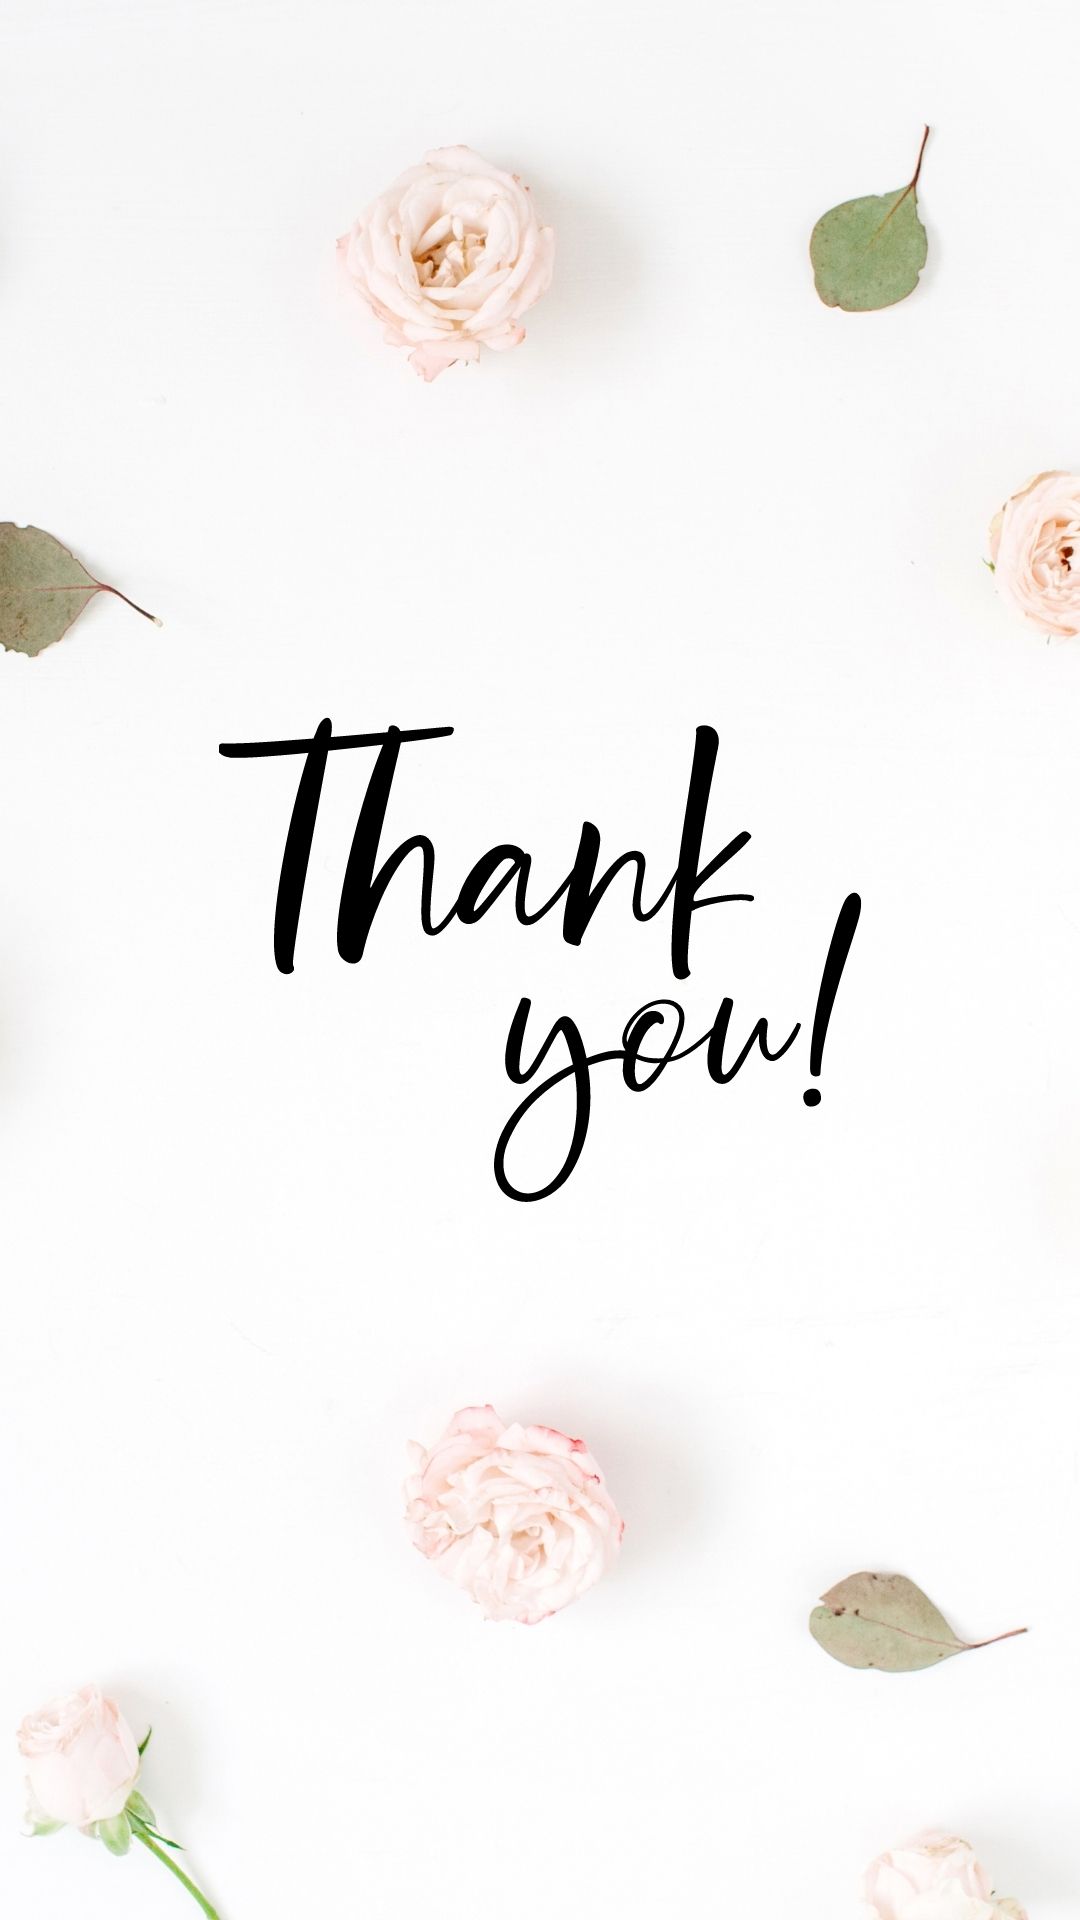 FREE DOWNLOAD  Thank You Typography Vector  Thank you typography  Wallpaper powerpoint Typography